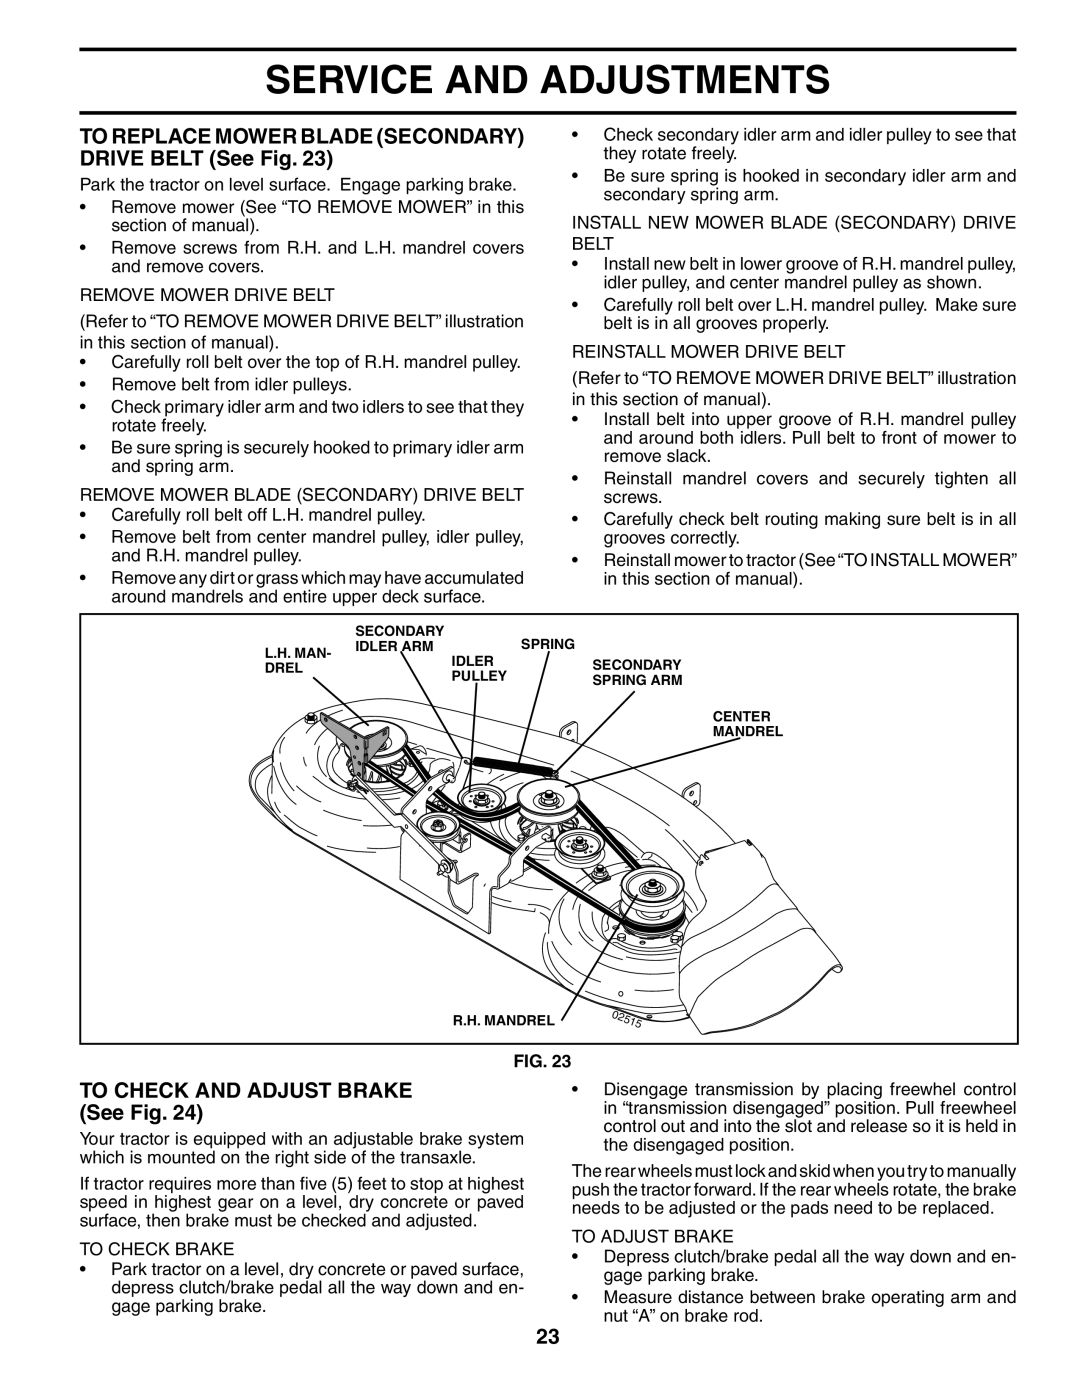 Poulan XT24H48YT manual TO REPLACE MOWER BLADE SECONDARY DRIVE BELT See Fig, TO CHECK AND ADJUST BRAKE See Fig 